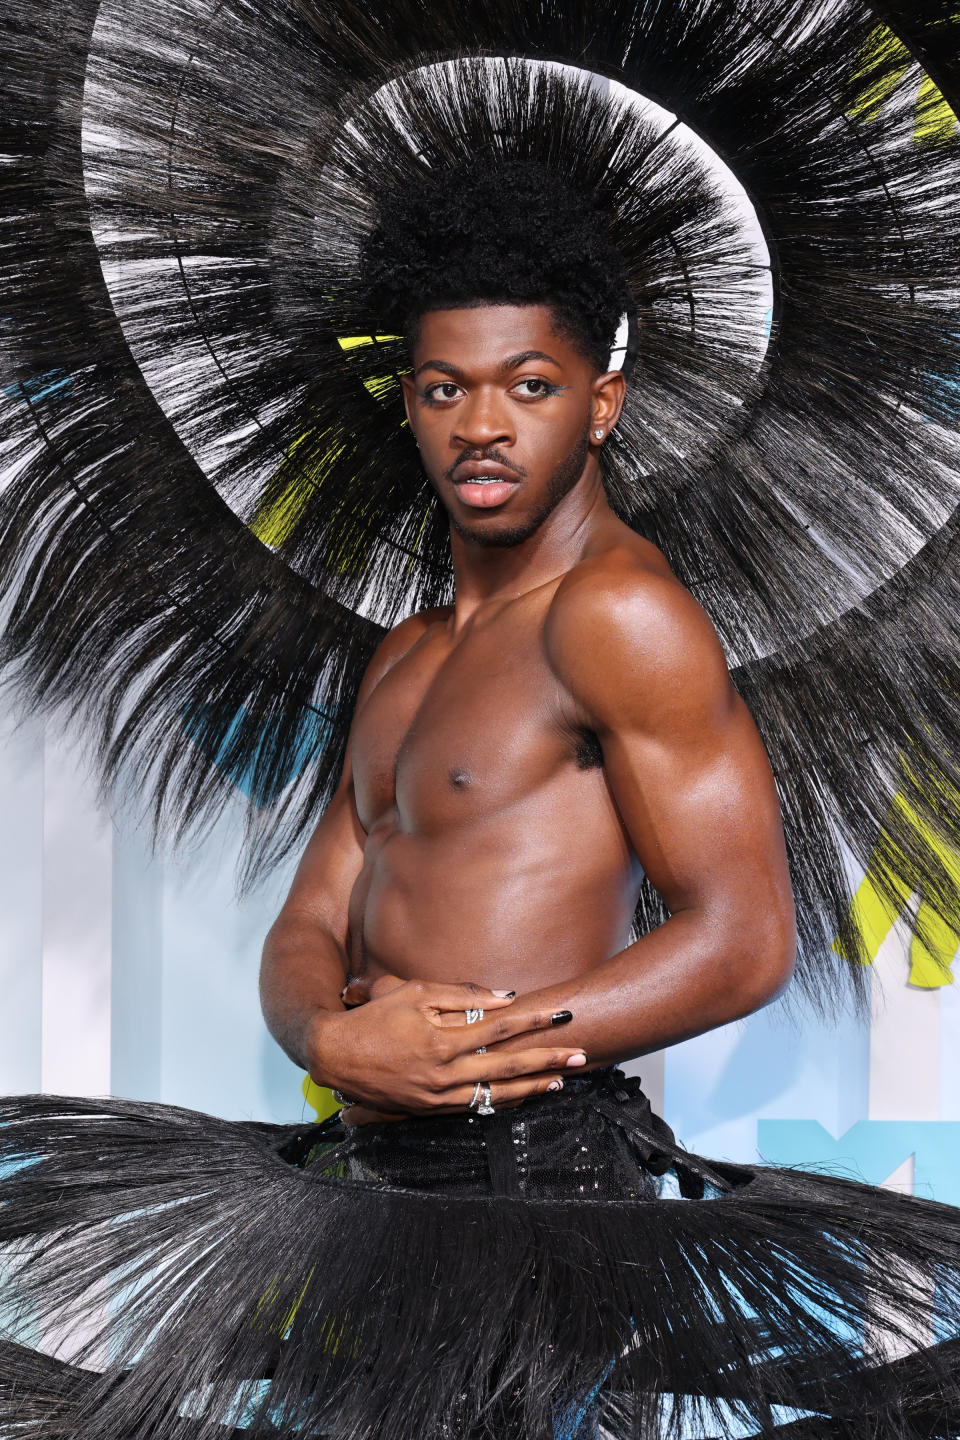 To achieve Lil Nas X's fabulous look at last night's show, celebrity hairstylist Coree Moreno used götb Metallics Permanent Hair Color in Blue Charcoal in the 